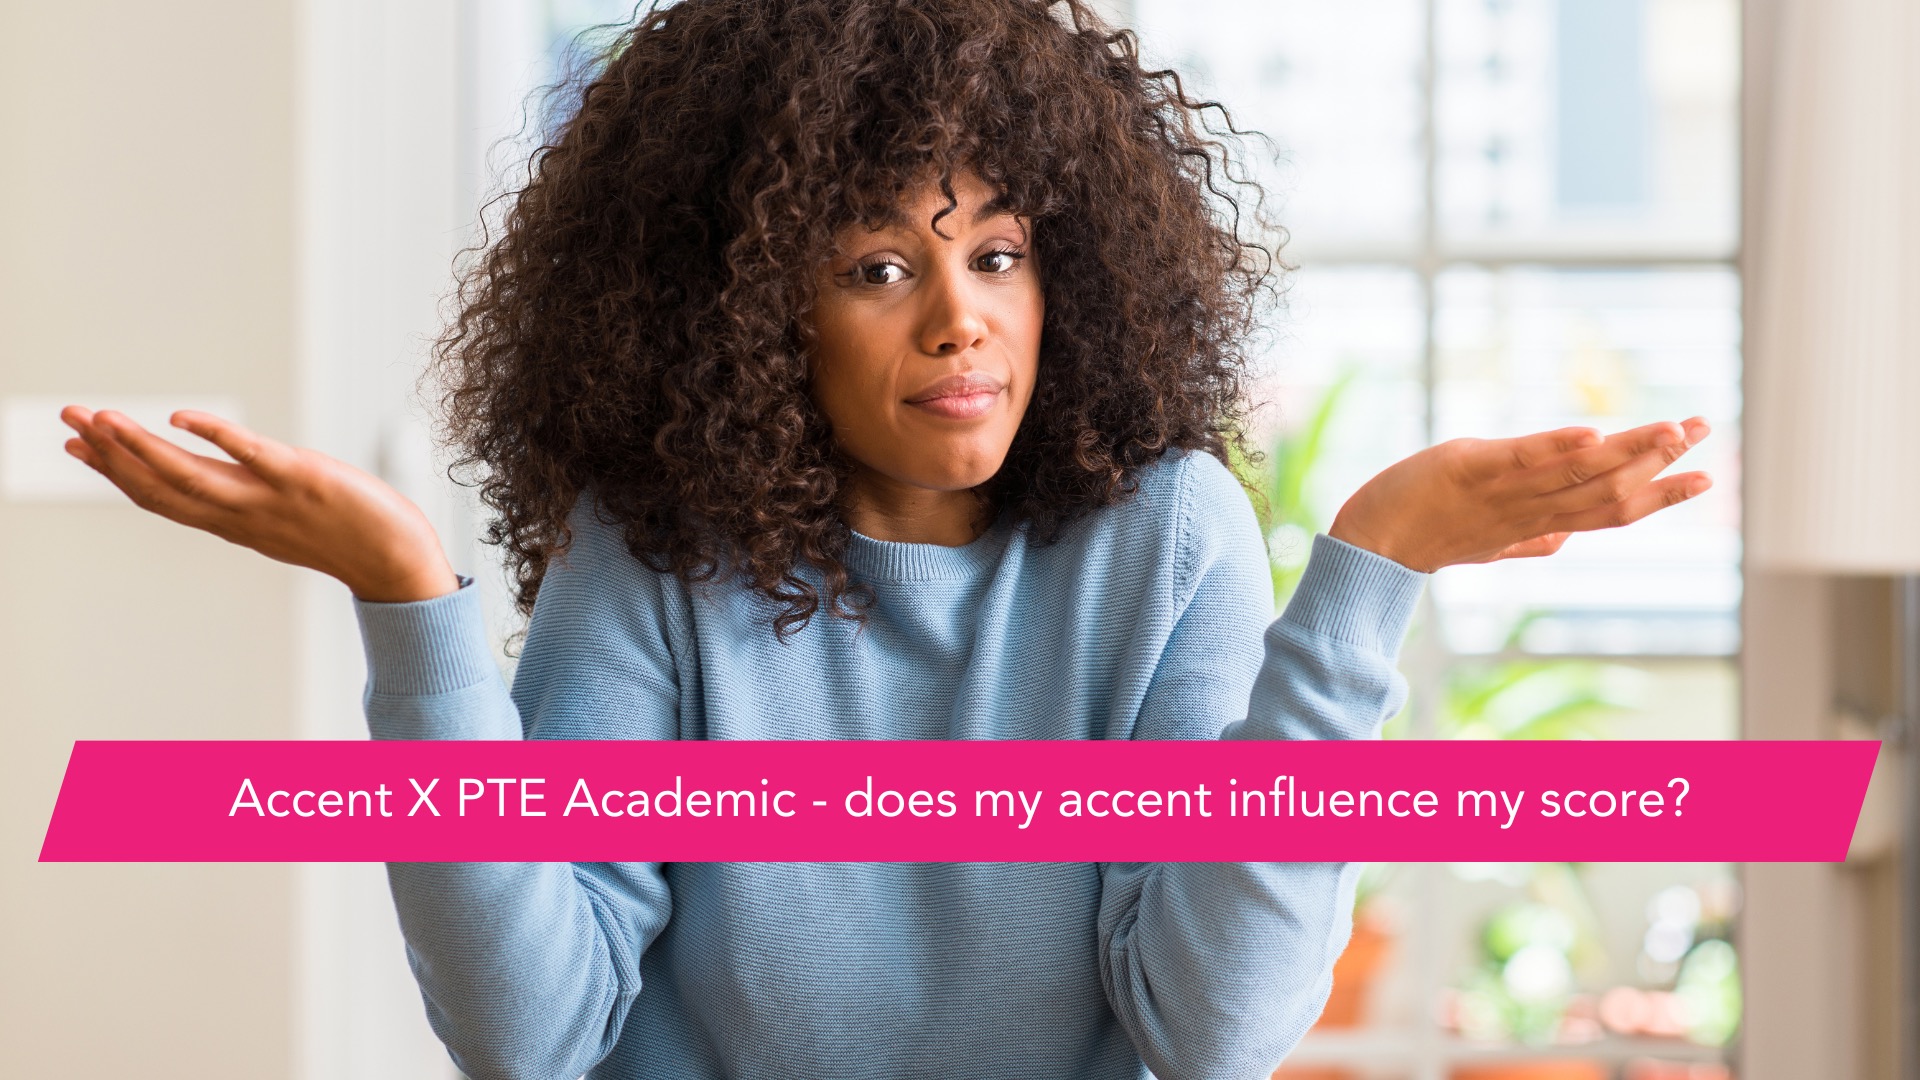 Accent X PTE Academic - does my accent influence my score?